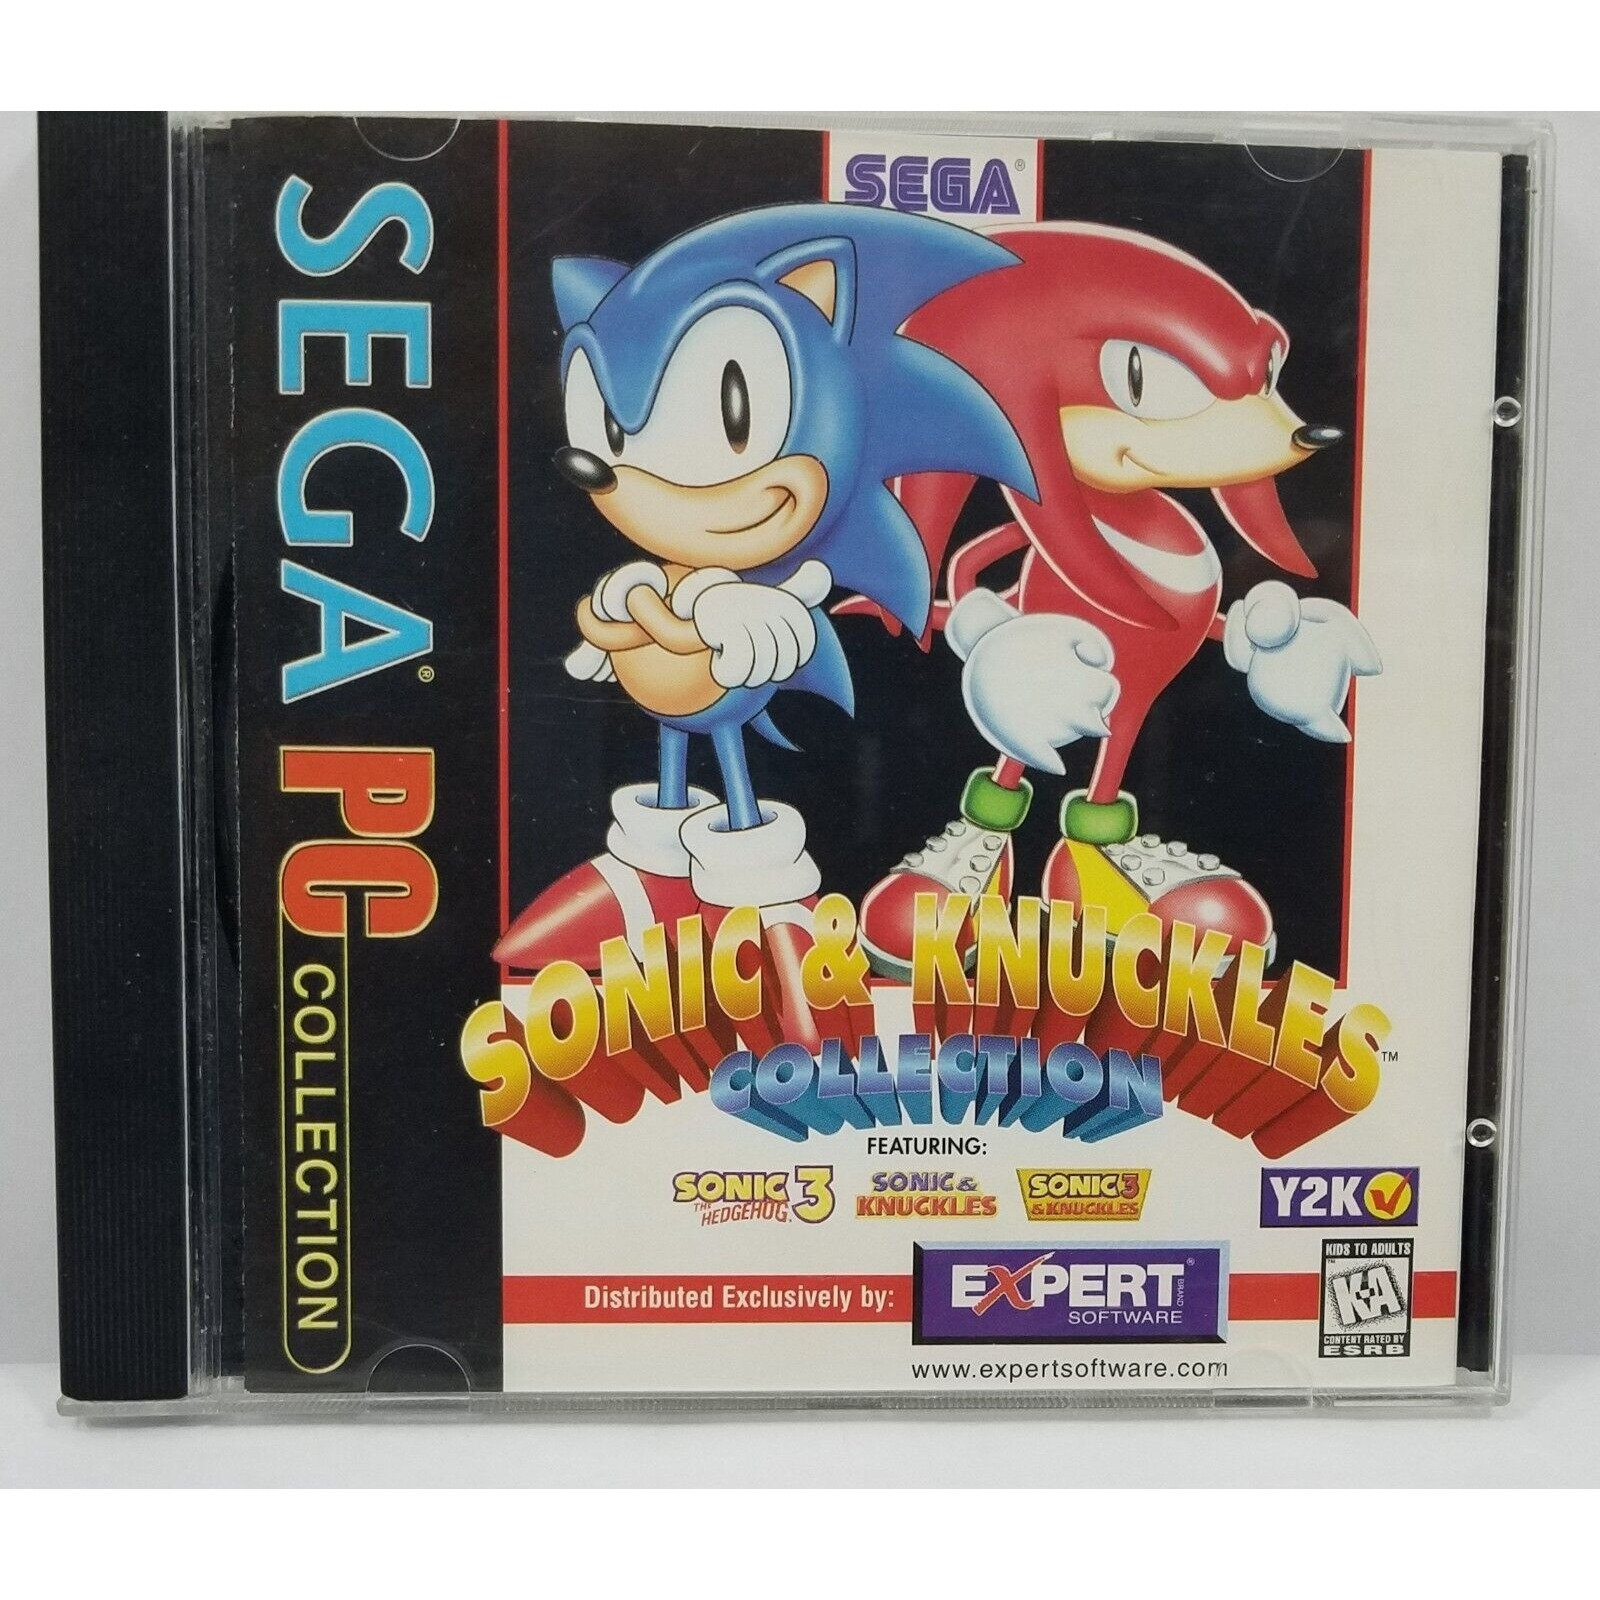 Mega Drive Software (without box&manual) SONIC THE HEDGEHOG 3, Game